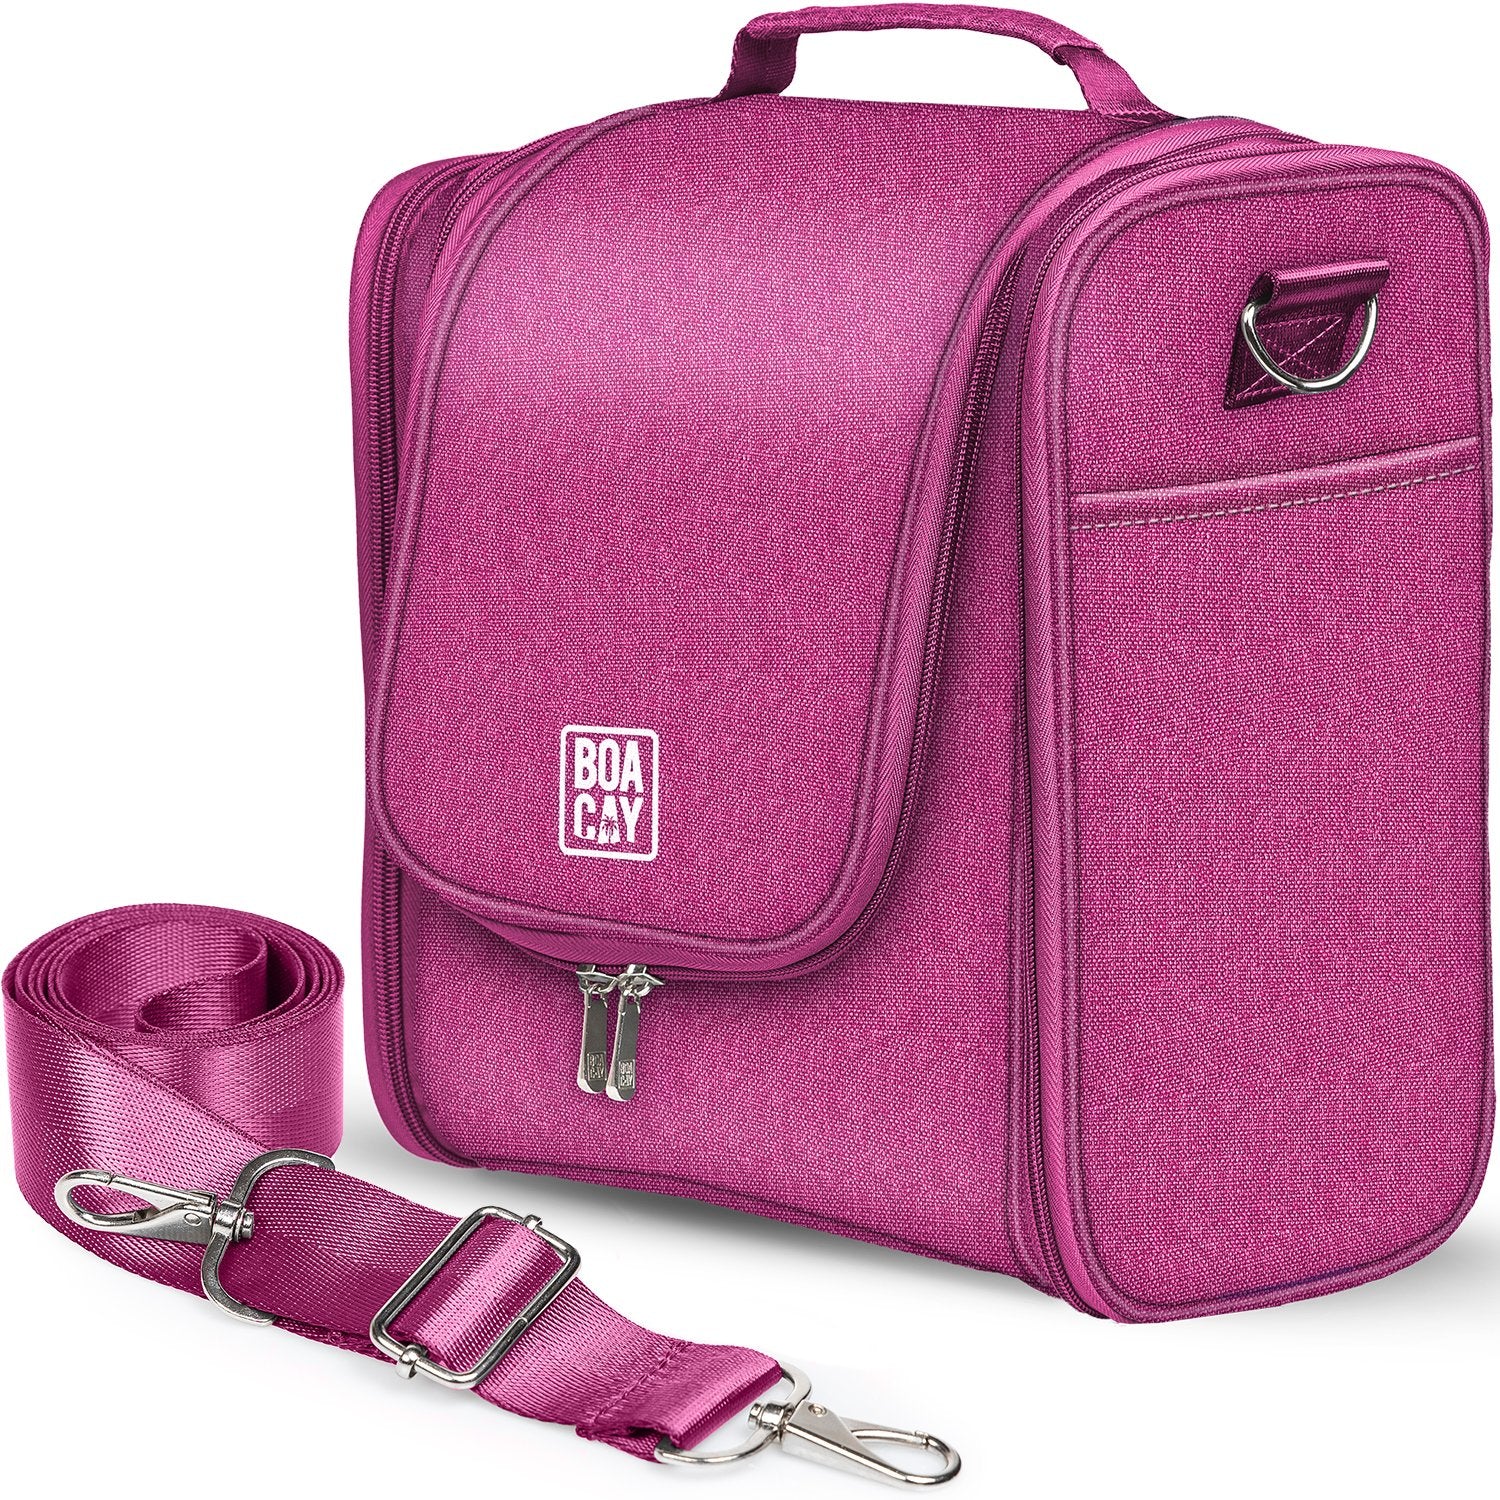 Cerise Pink Extra-Large Travel Toiletry Bag for Women and Men